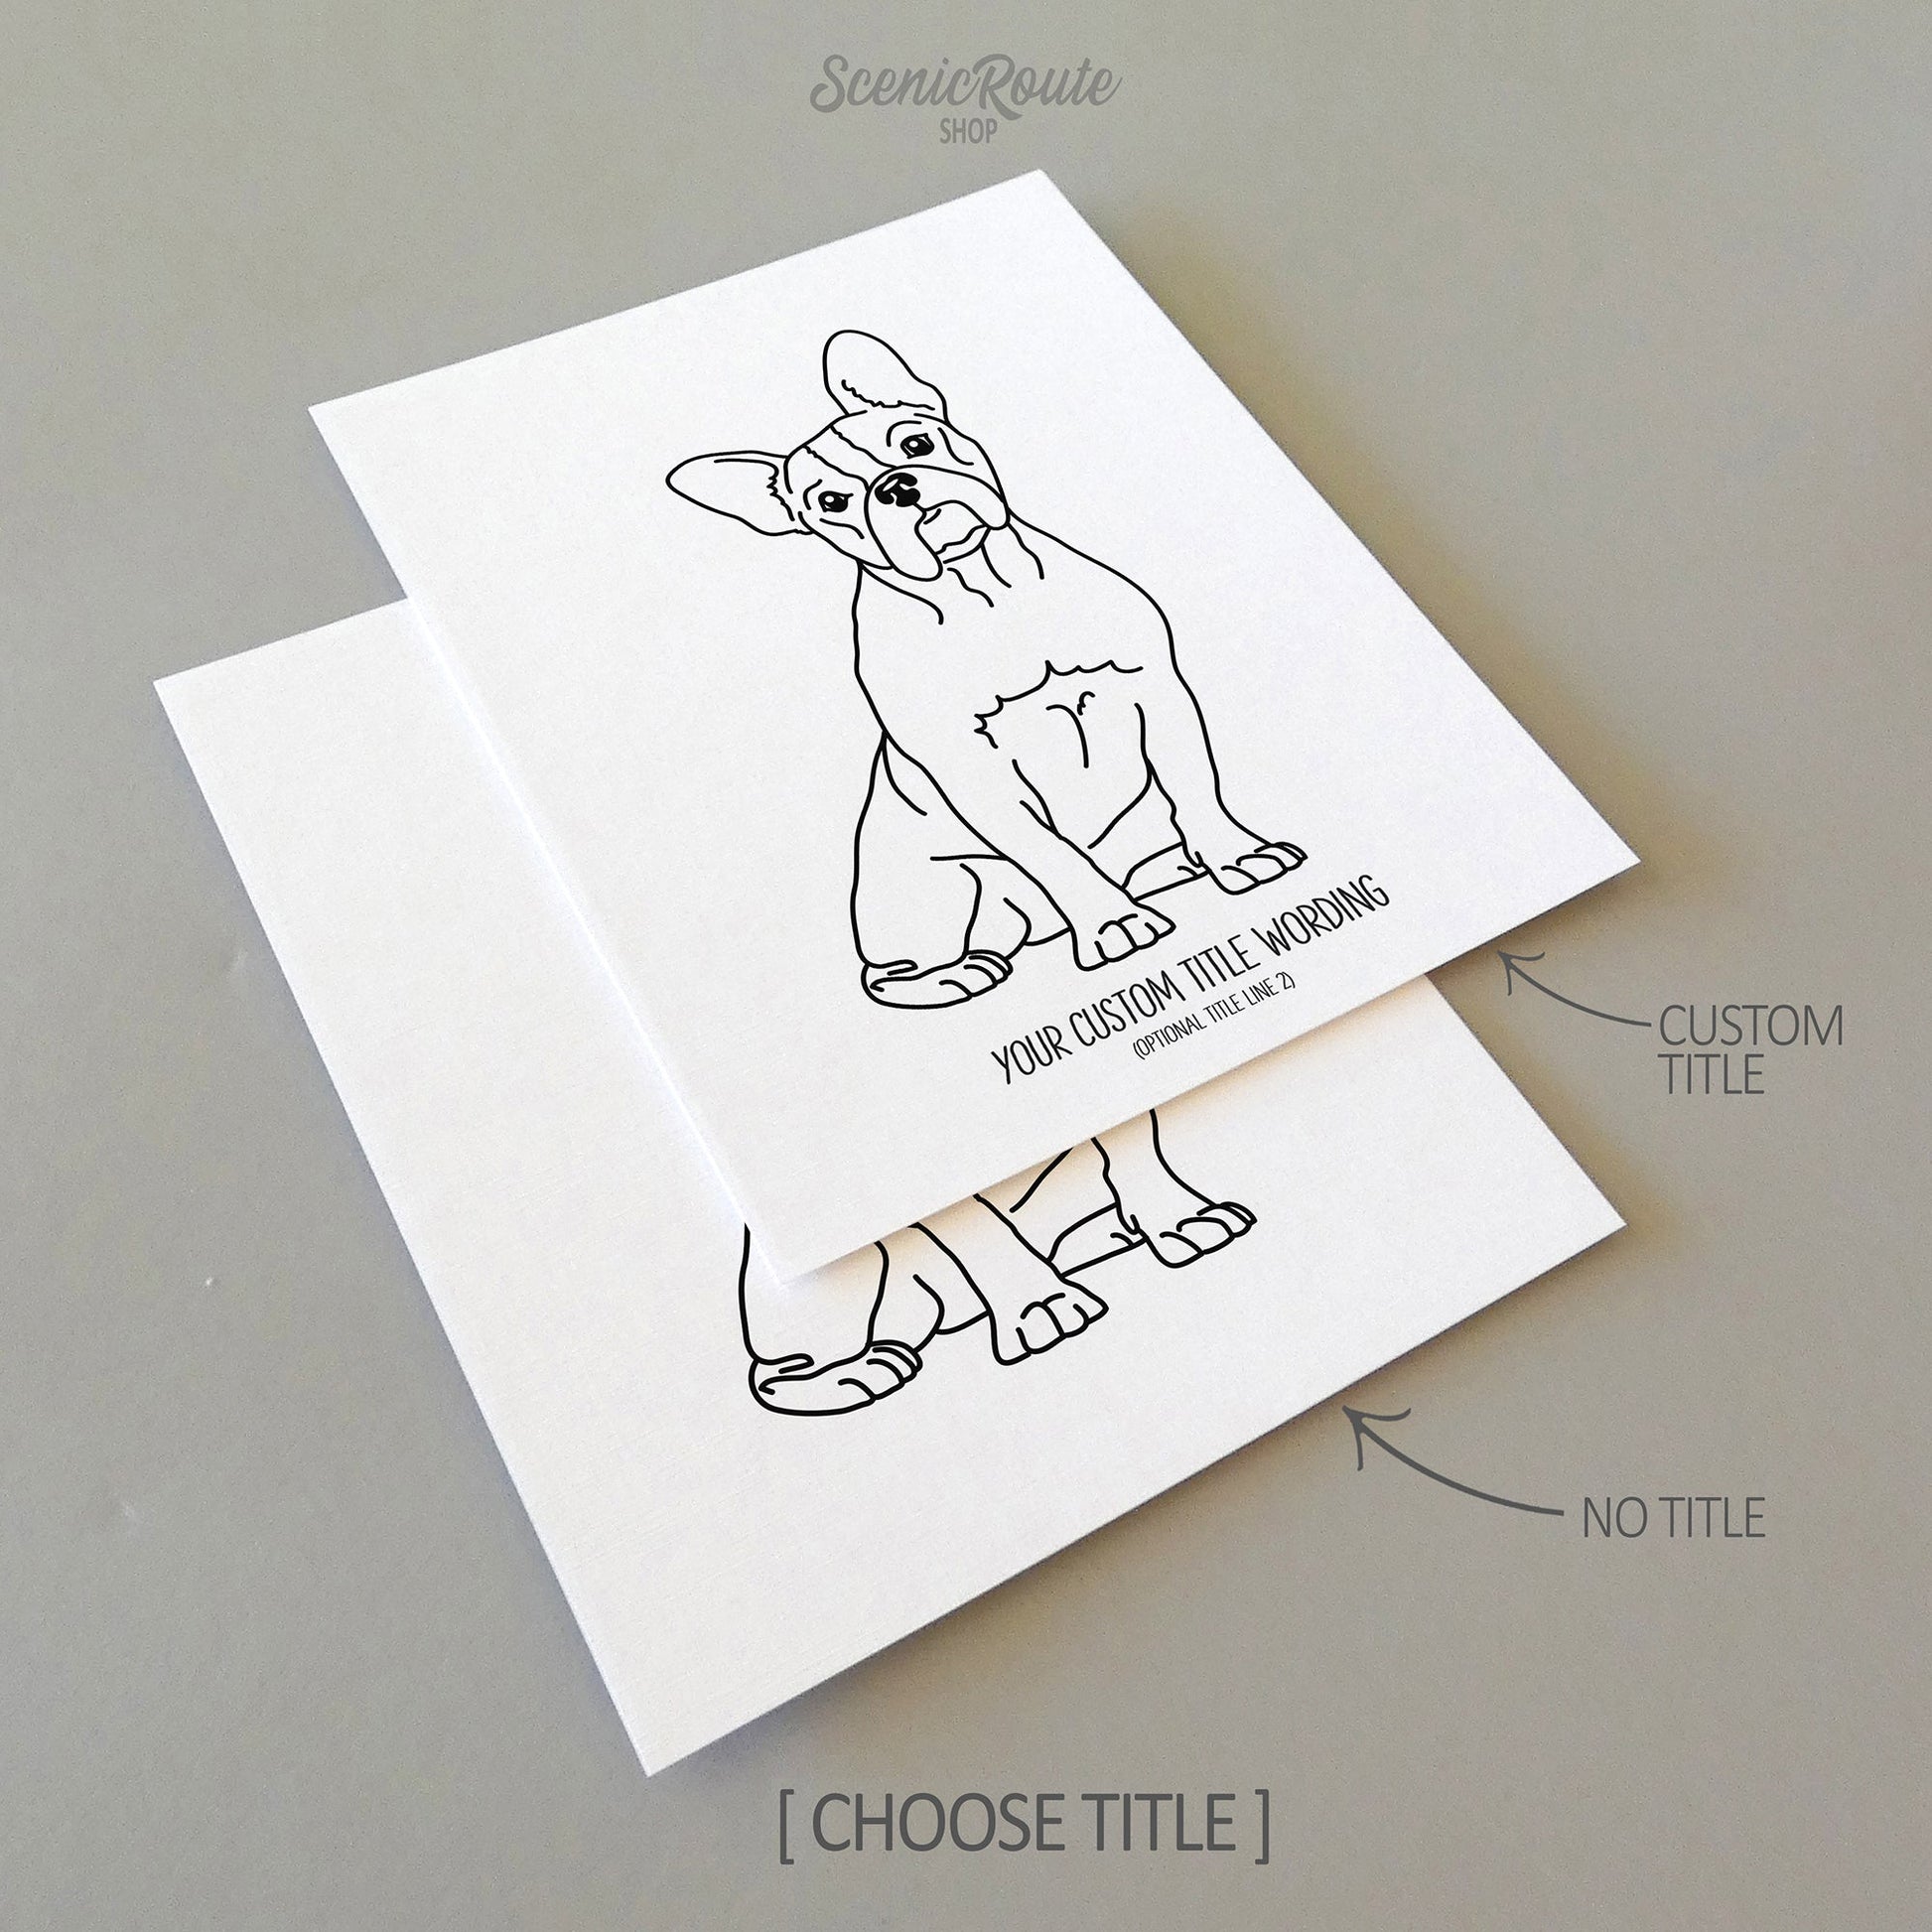 Two drawings of a Boston Terrier dog on white linen paper with a gray background.  Pieces are shown with “No Title” and “Custom Title” options to illustrate the available art print options.